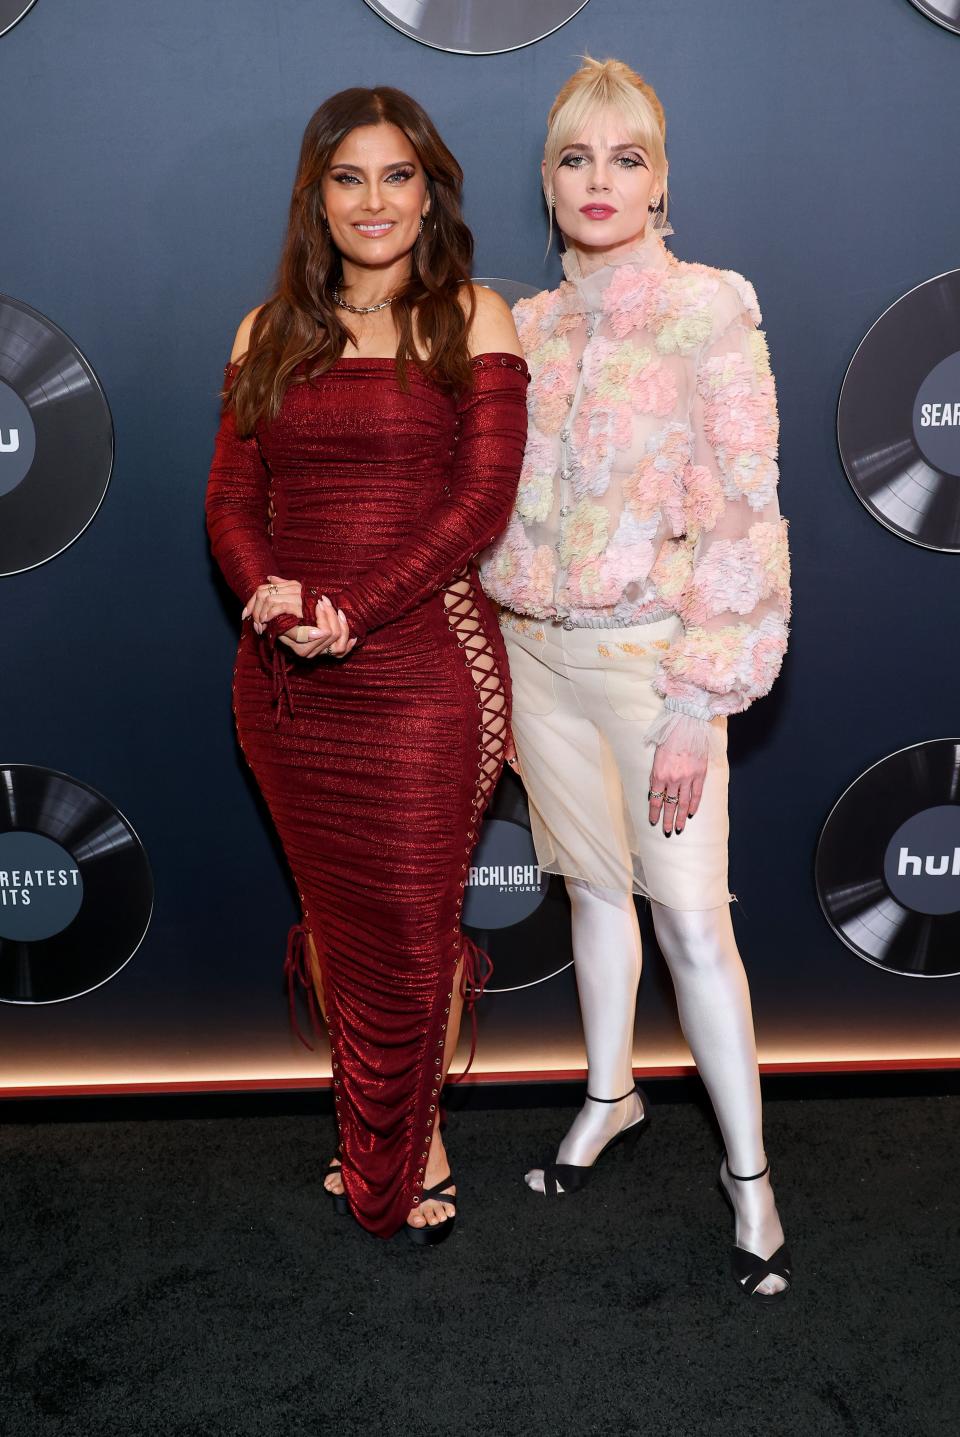 Nelly Furtado and actress Lucy Boynton at the premiere of their film 